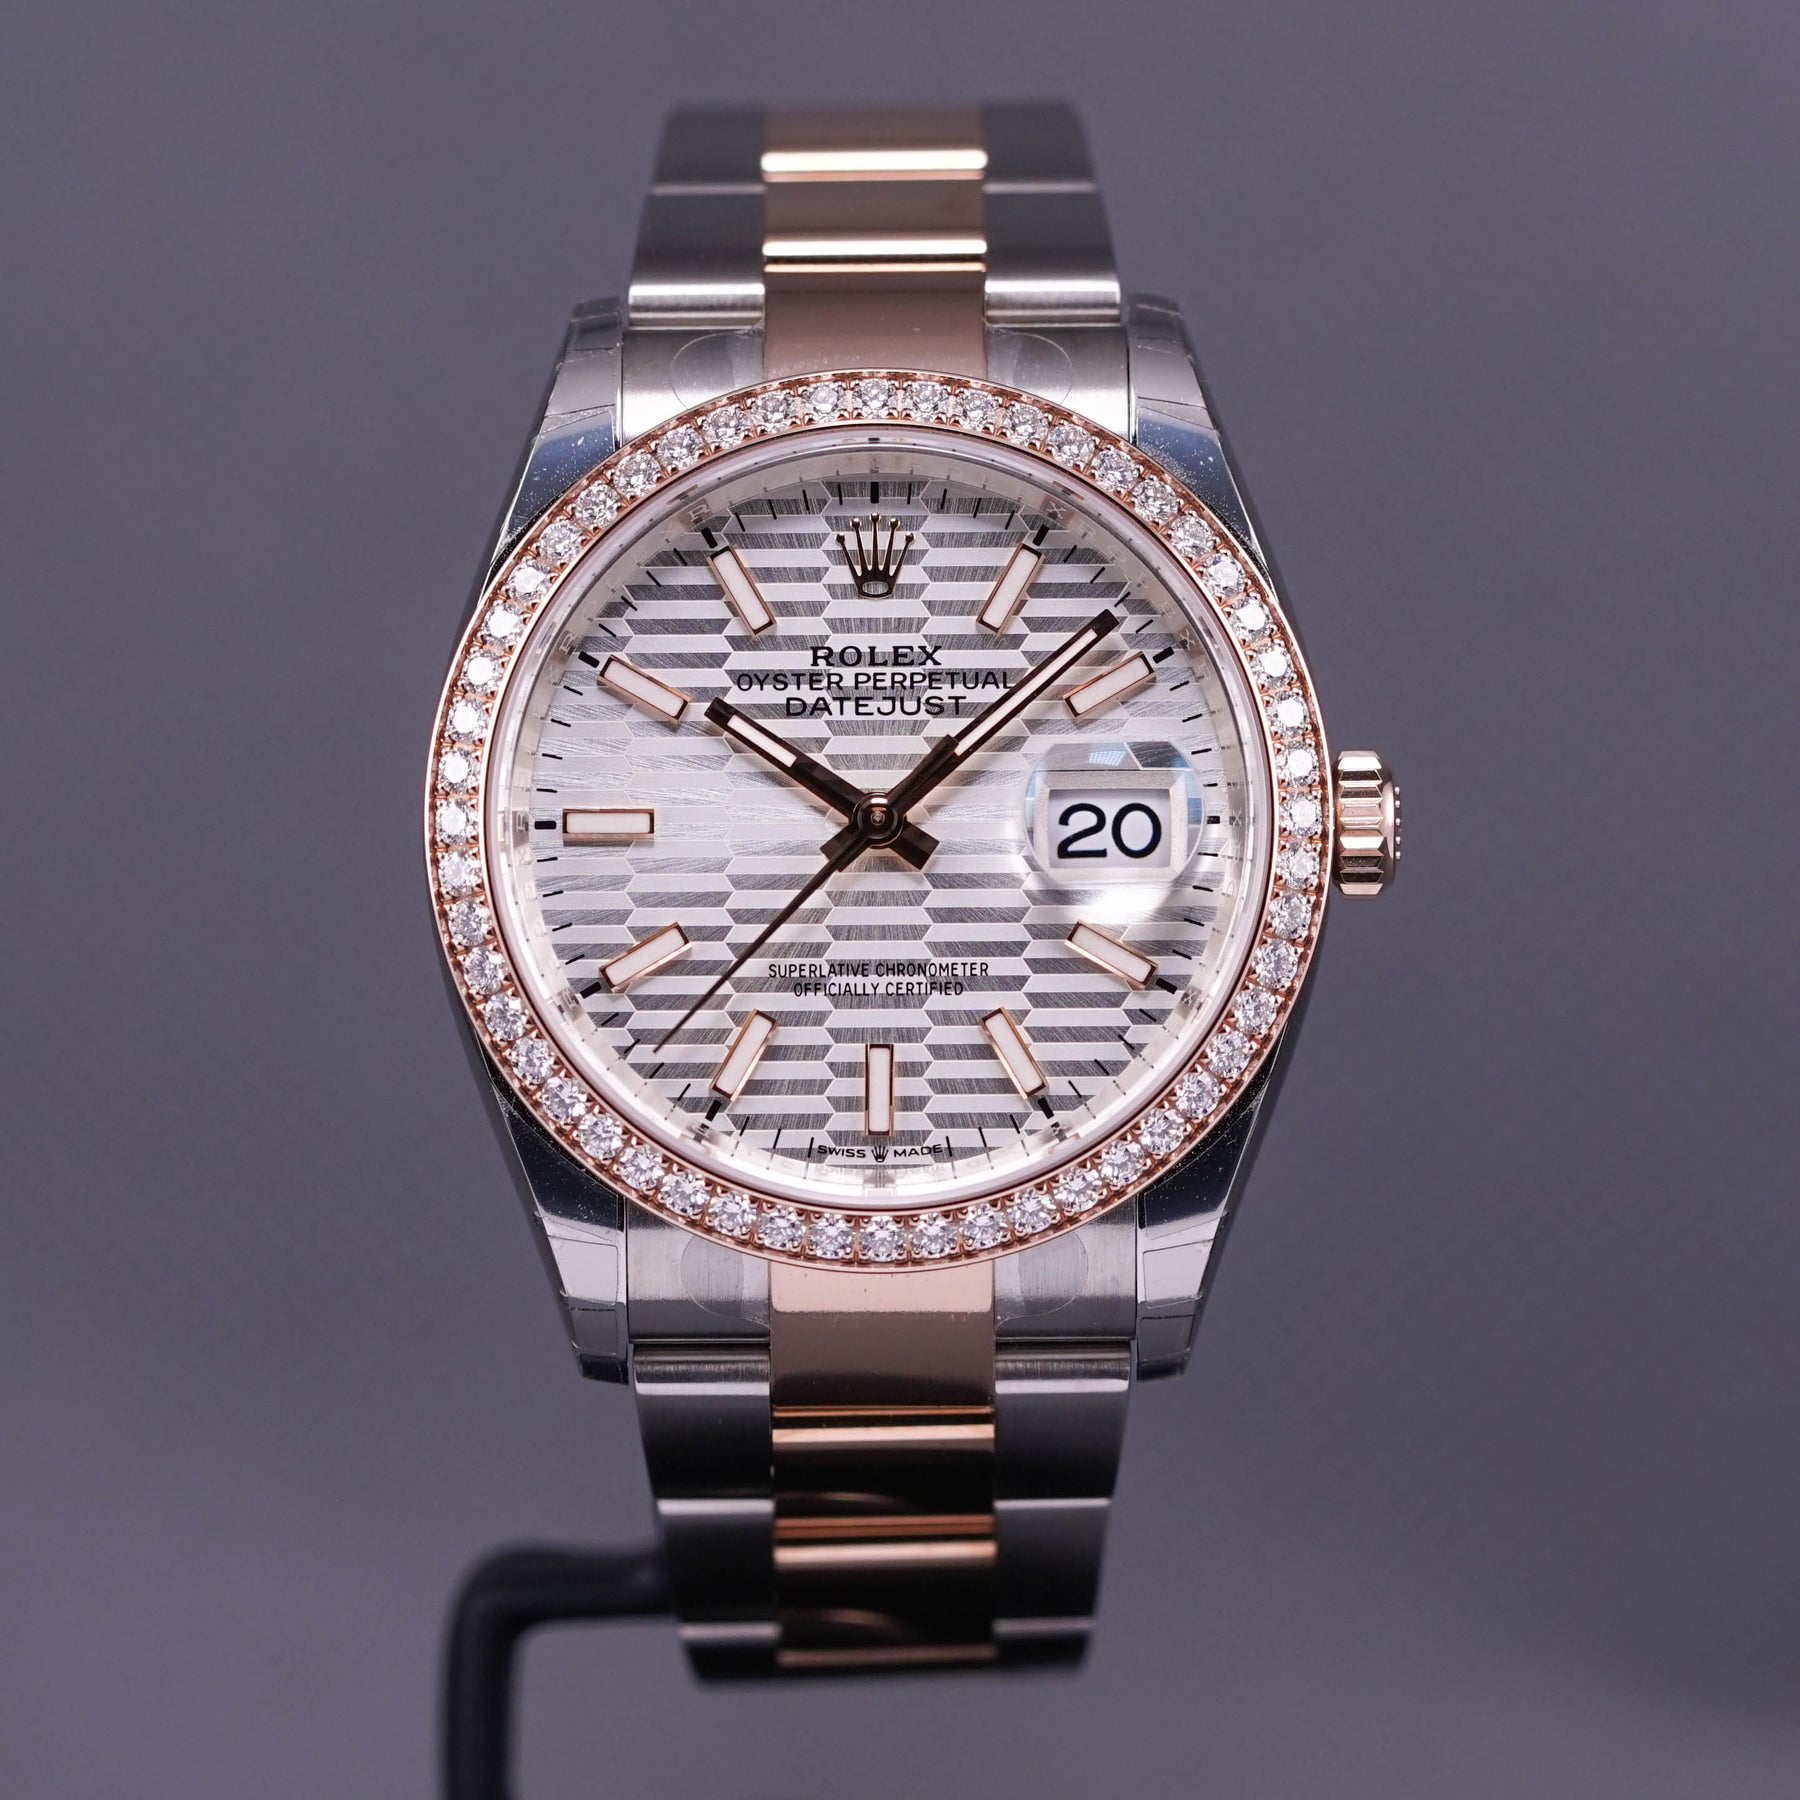 DATEJUST 36MM TWOTONE ROSEGOLD FLUTED DIAL DIAMOND BEZEL